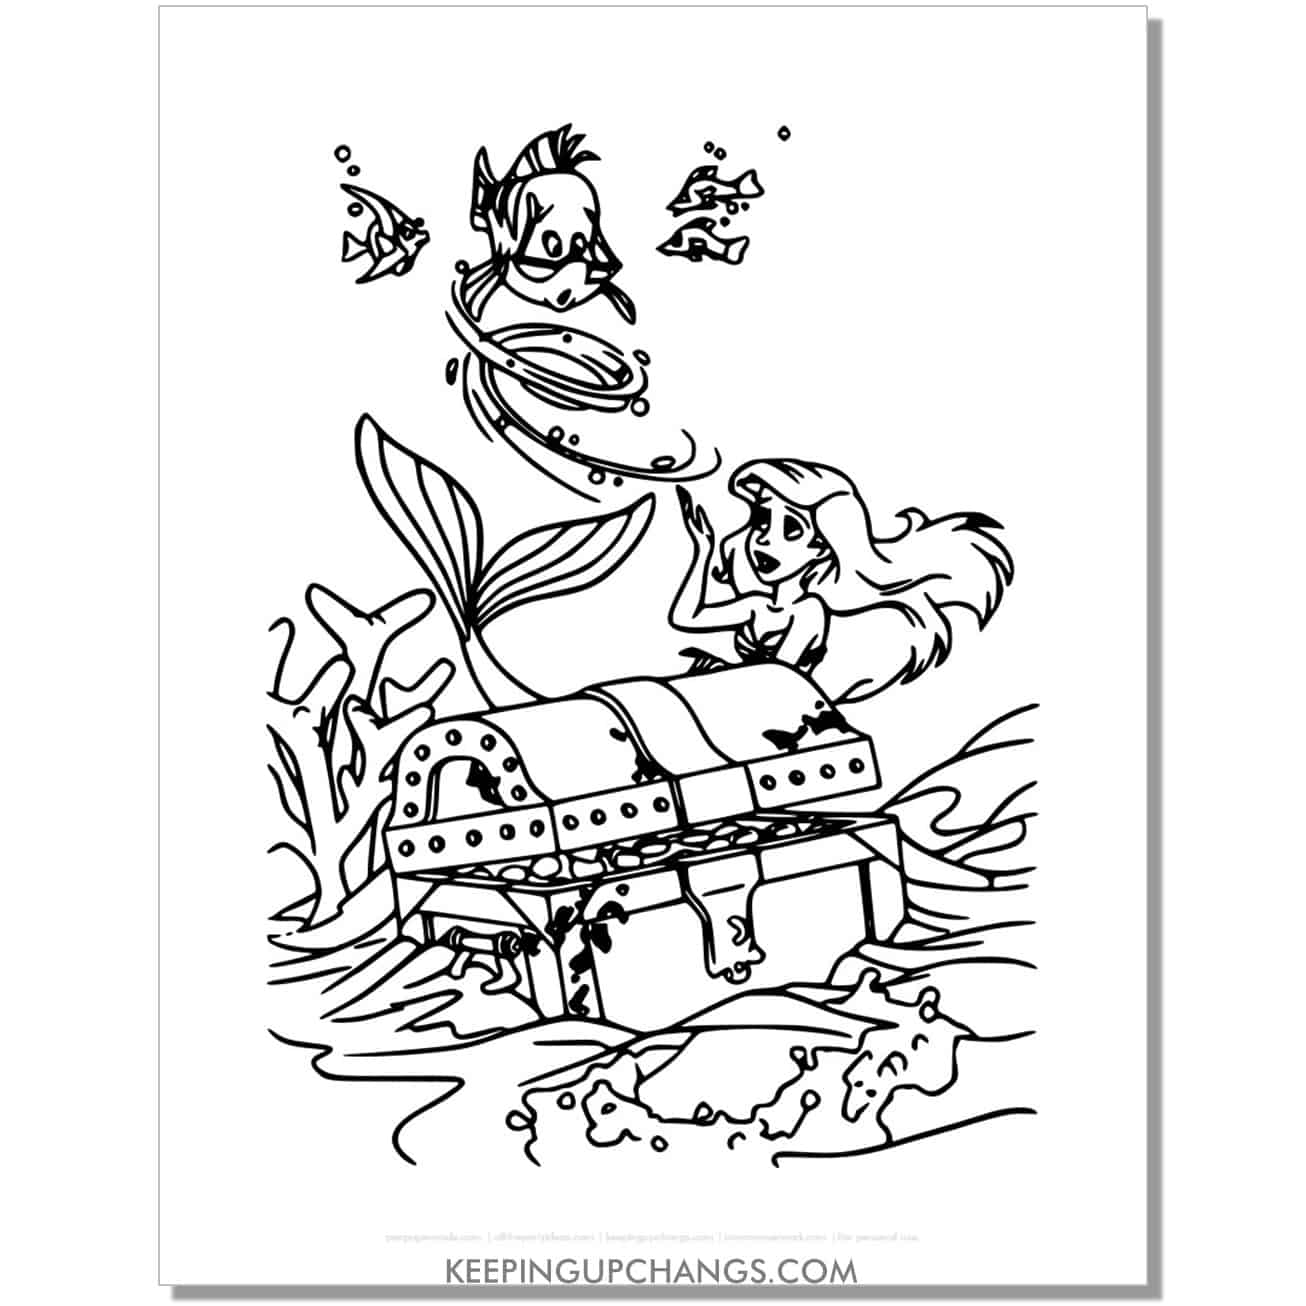 little mermaid ariel, flounder find treasure chest coloring page, sheet.